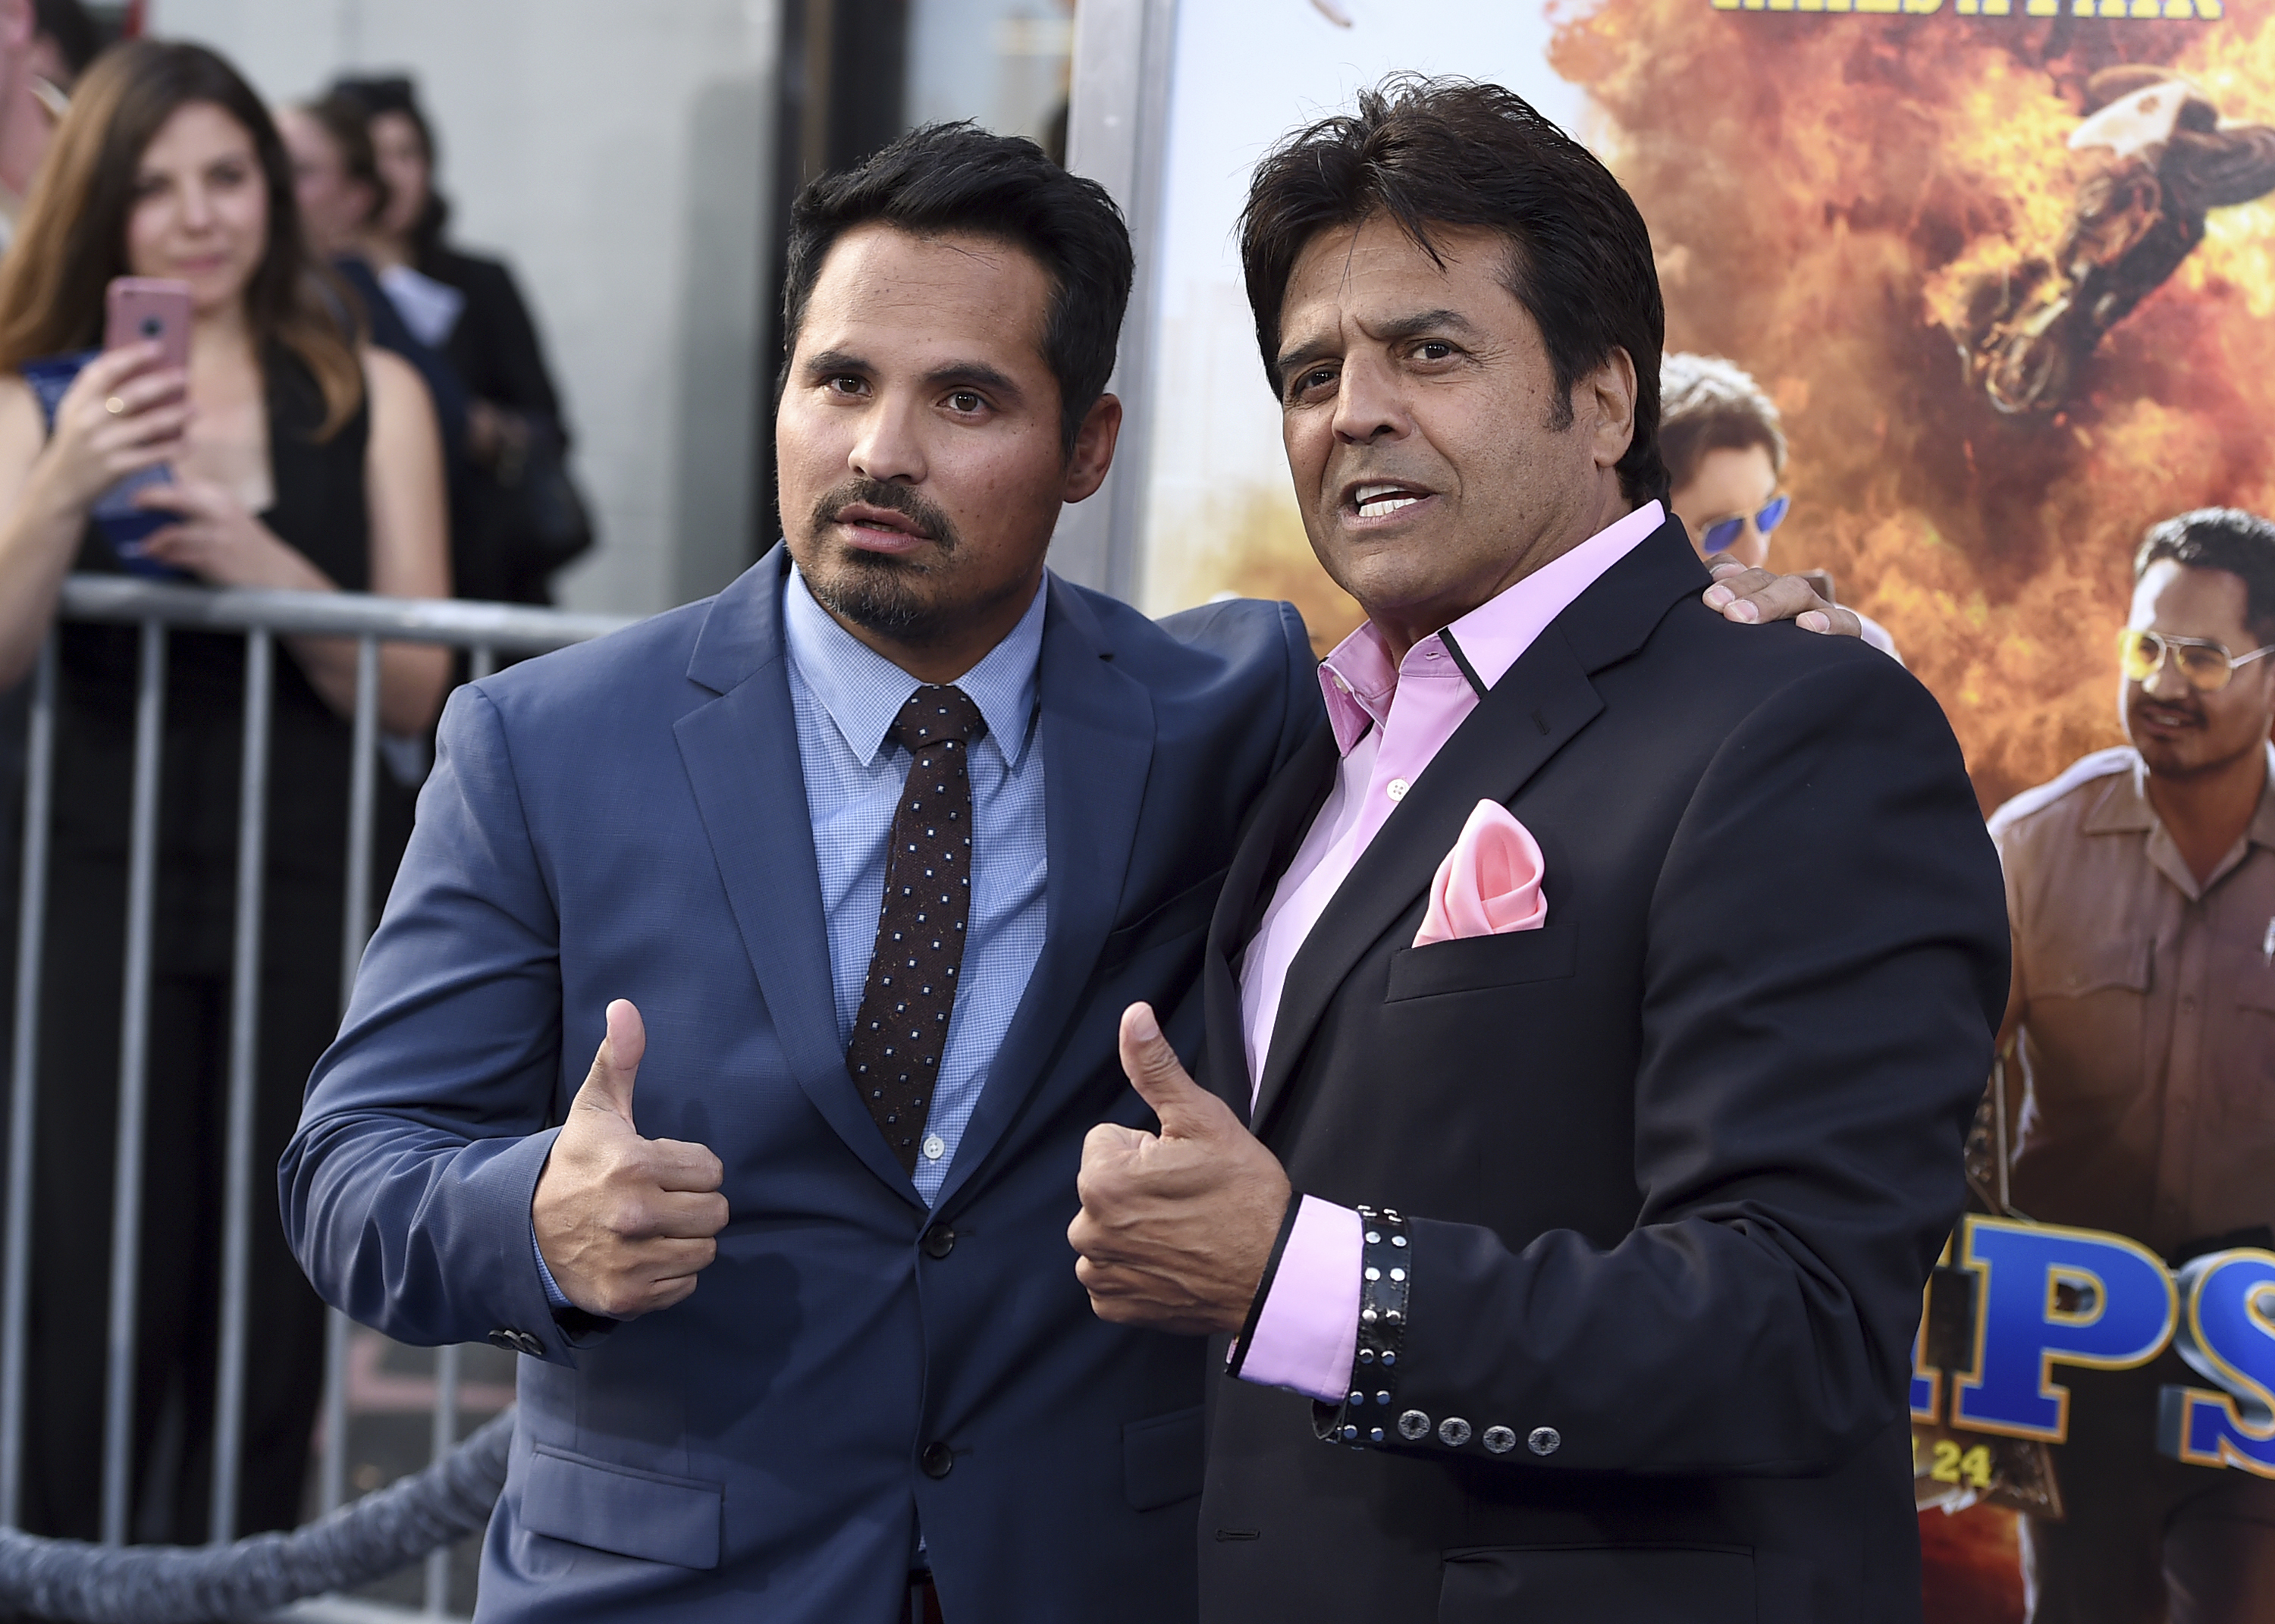 Michael Pena (left) and Erik Estrada pose at the Los Angeles premiere of "CHIPS" at the TCL Chinese Theatre on Monday, March 20. (Photo by Jordan Strauss/Invision/AP)